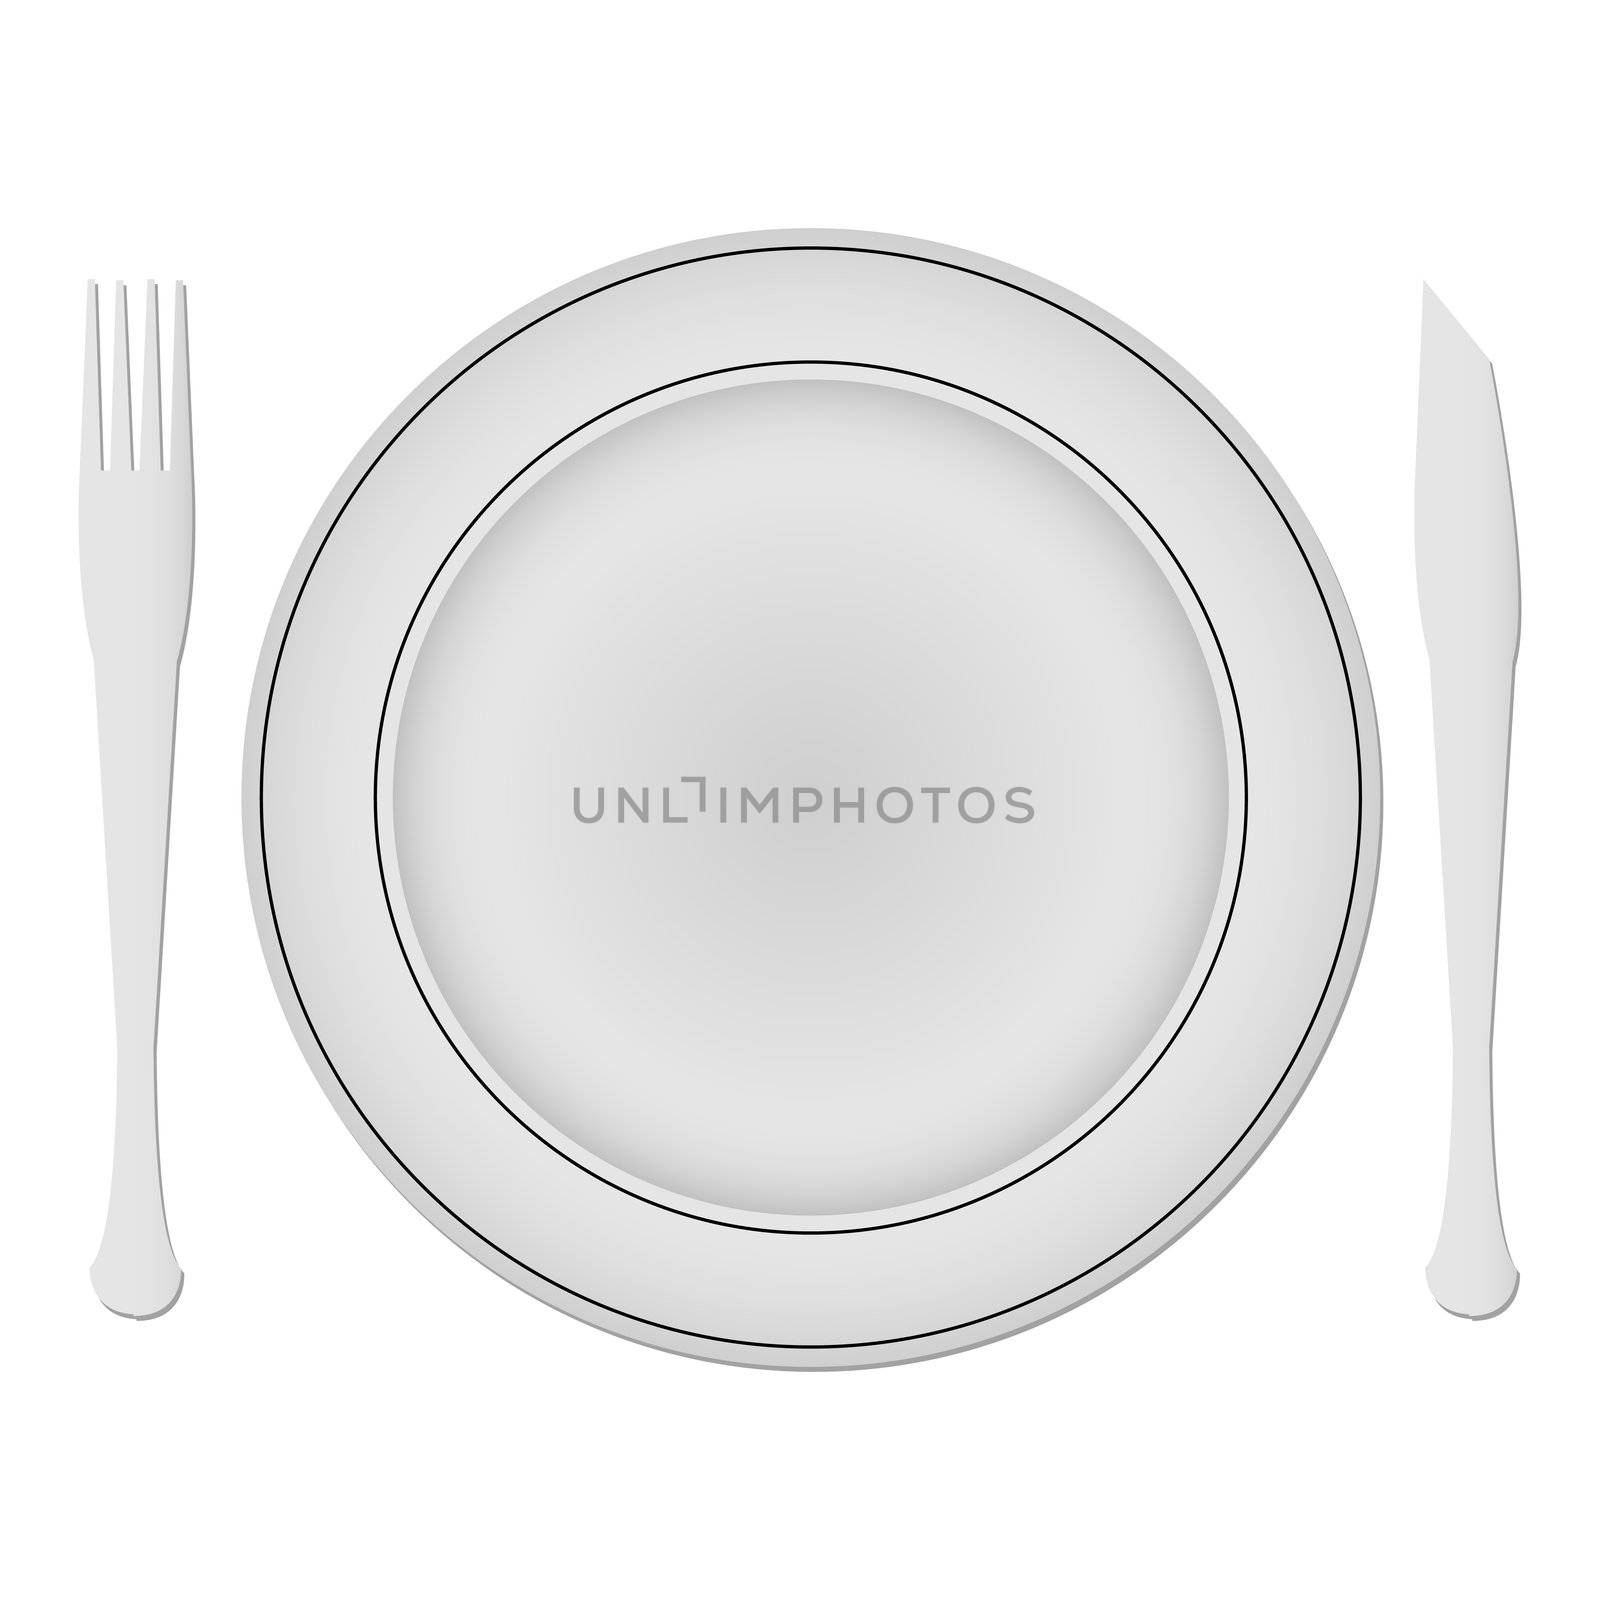 plate and dishes against white background; abstract vector art illustration